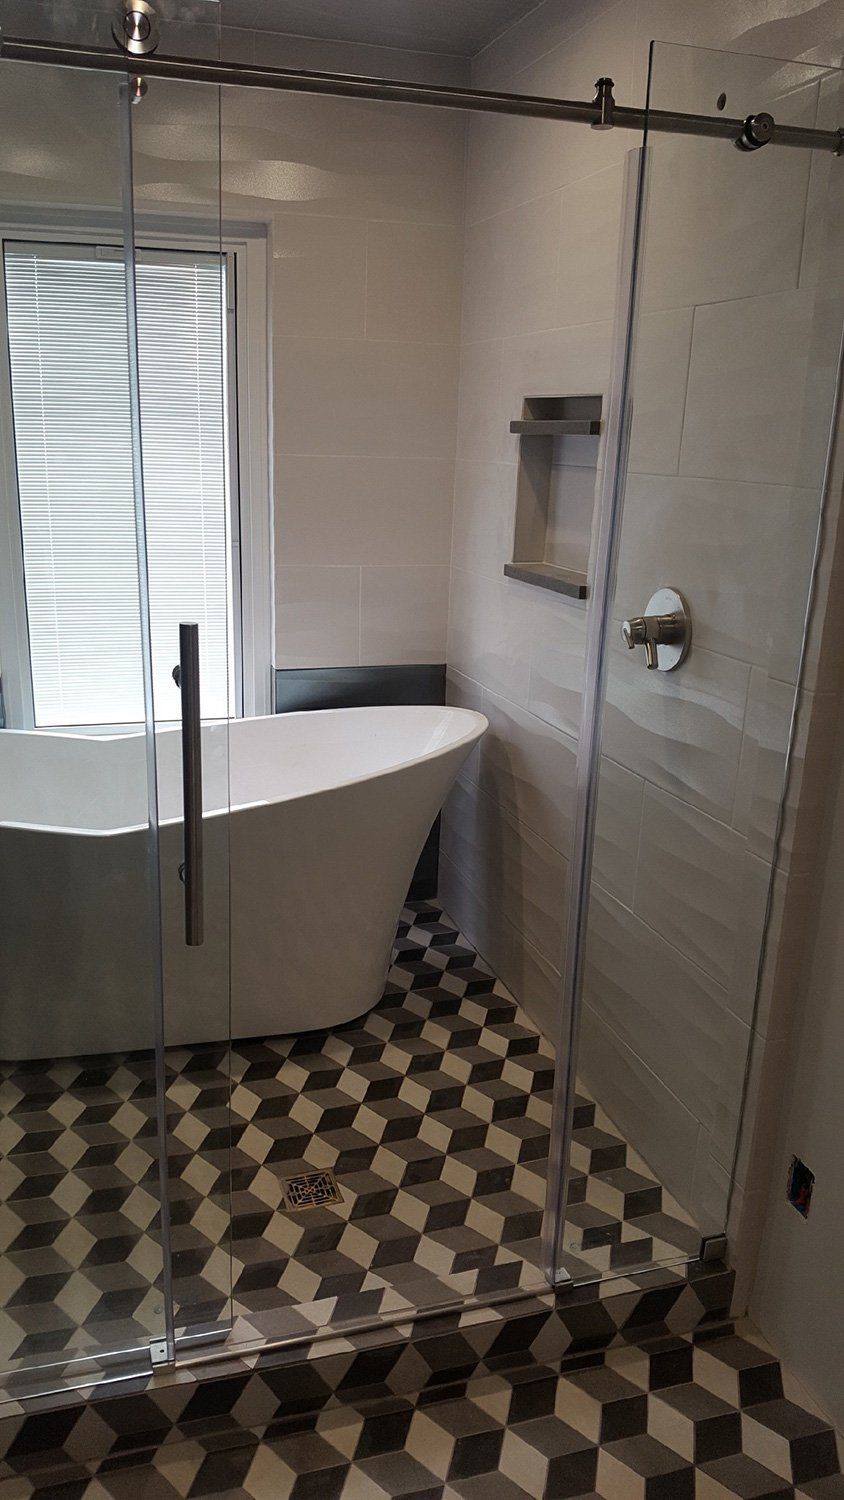 bathroom with ceramic tiles as floors and walls